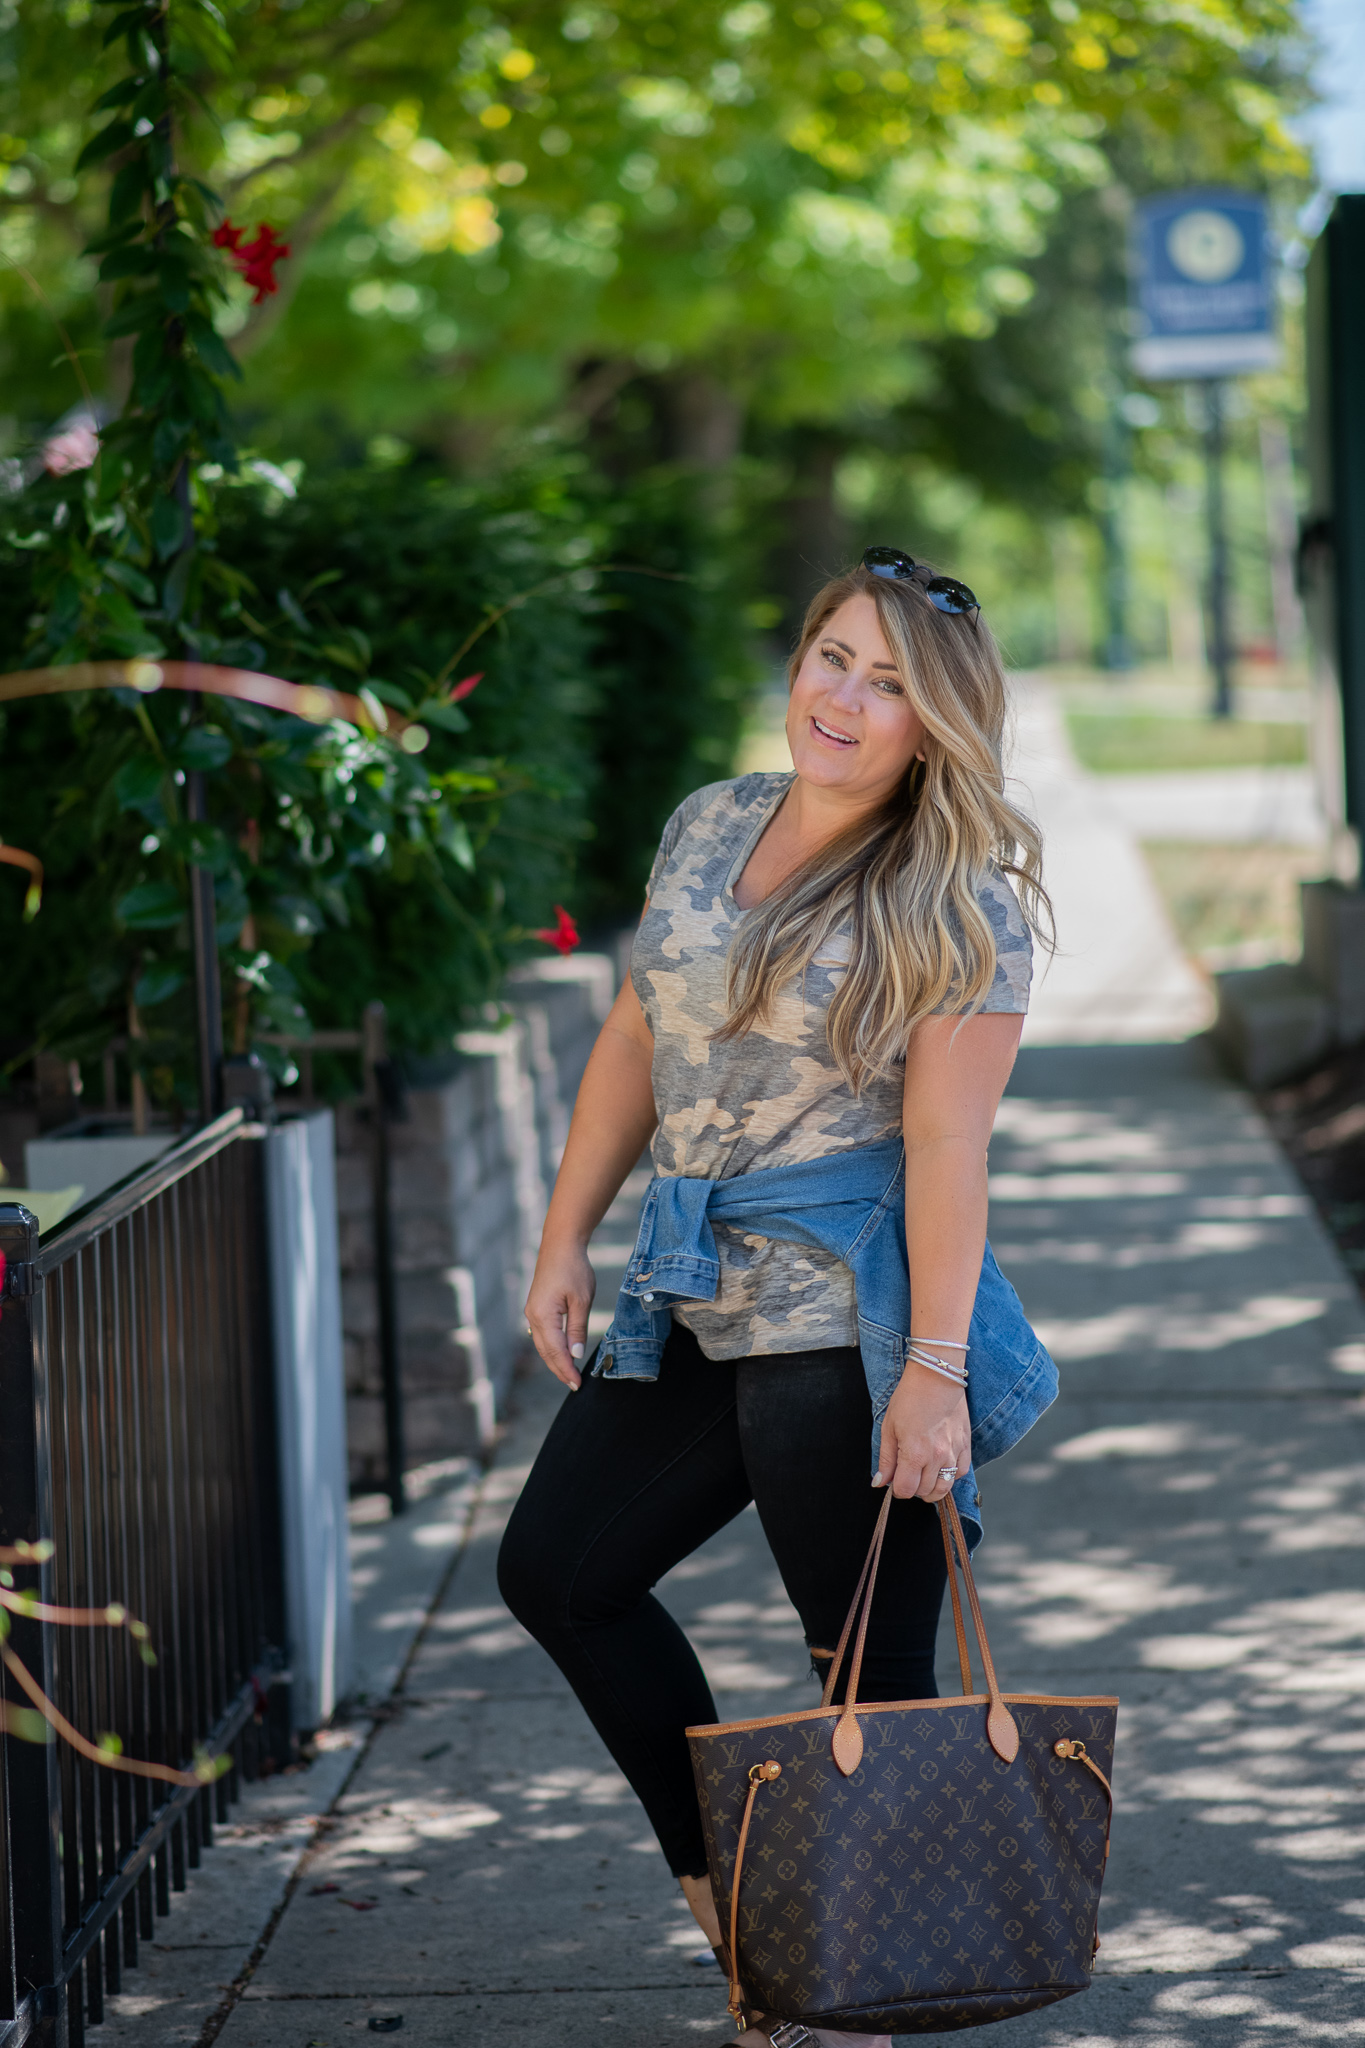 Back to School Style with Kohl's by popular North Carolina fashion blog, Coffee Beans and Bobby Pins: image of a woman standing outside and wearing a Kohl's MUDD camo tee, Kohl's distressed denim, Kohl's metallic slide sandals, and carrying a Louis Vuitton bag.